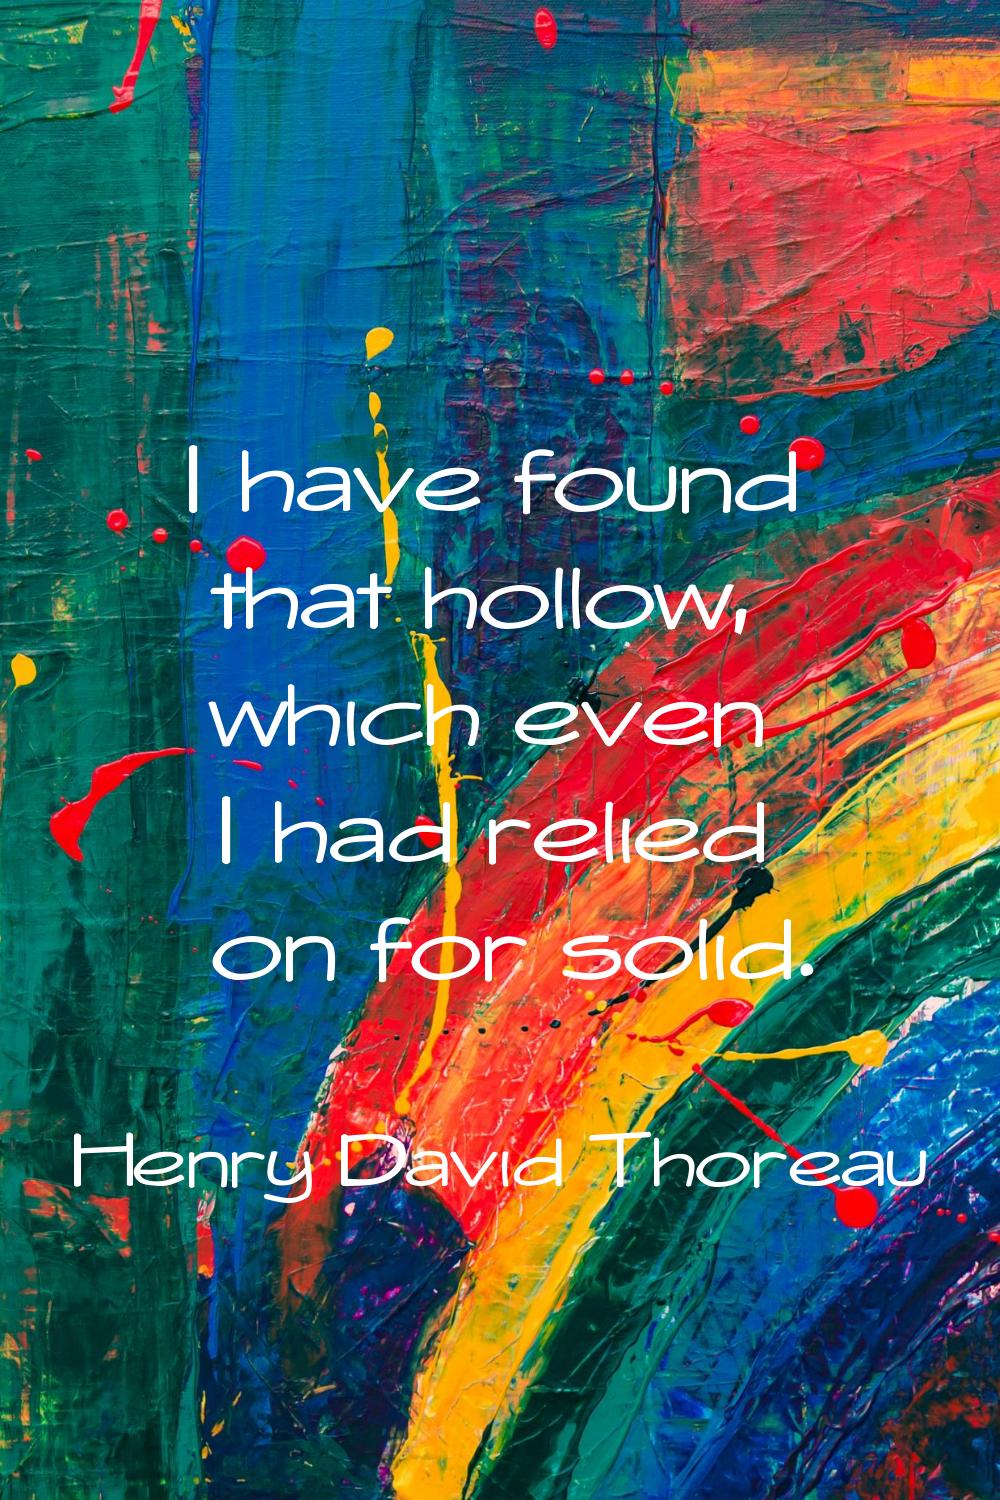 I have found that hollow, which even I had relied on for solid.